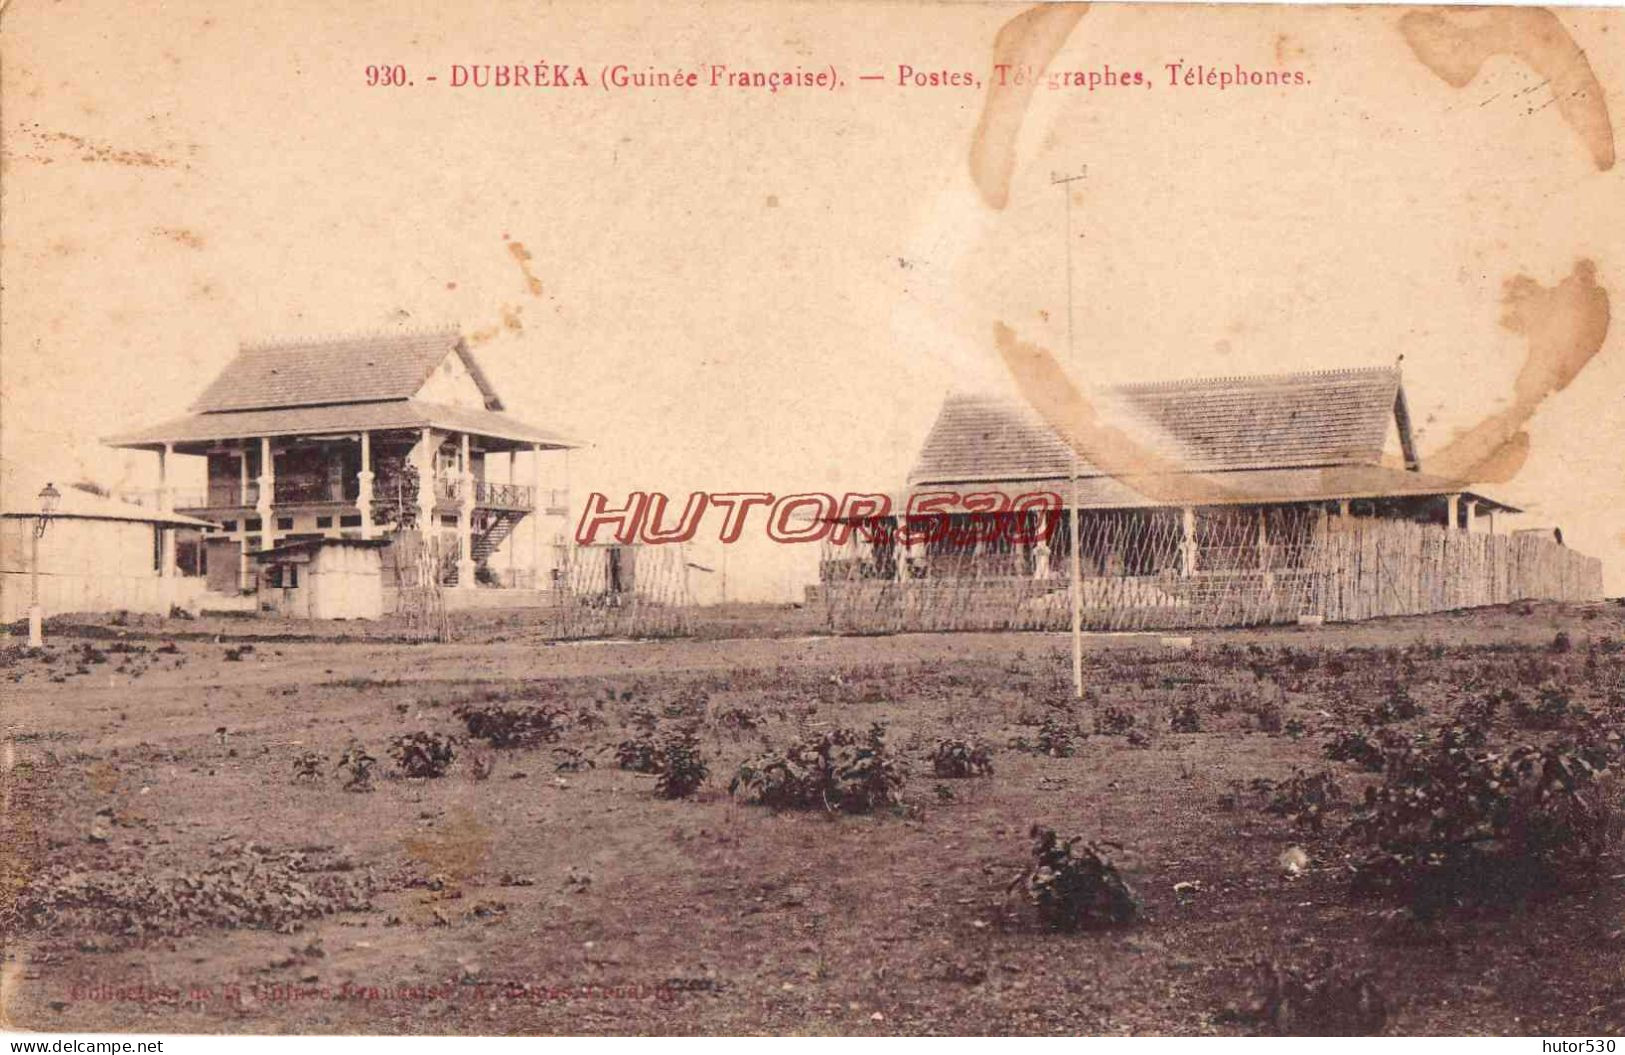 CPA DUBREKA - GUINEE FRANCAISE - POSTES TELEGRAPHES TELEPHONE - French Guinea